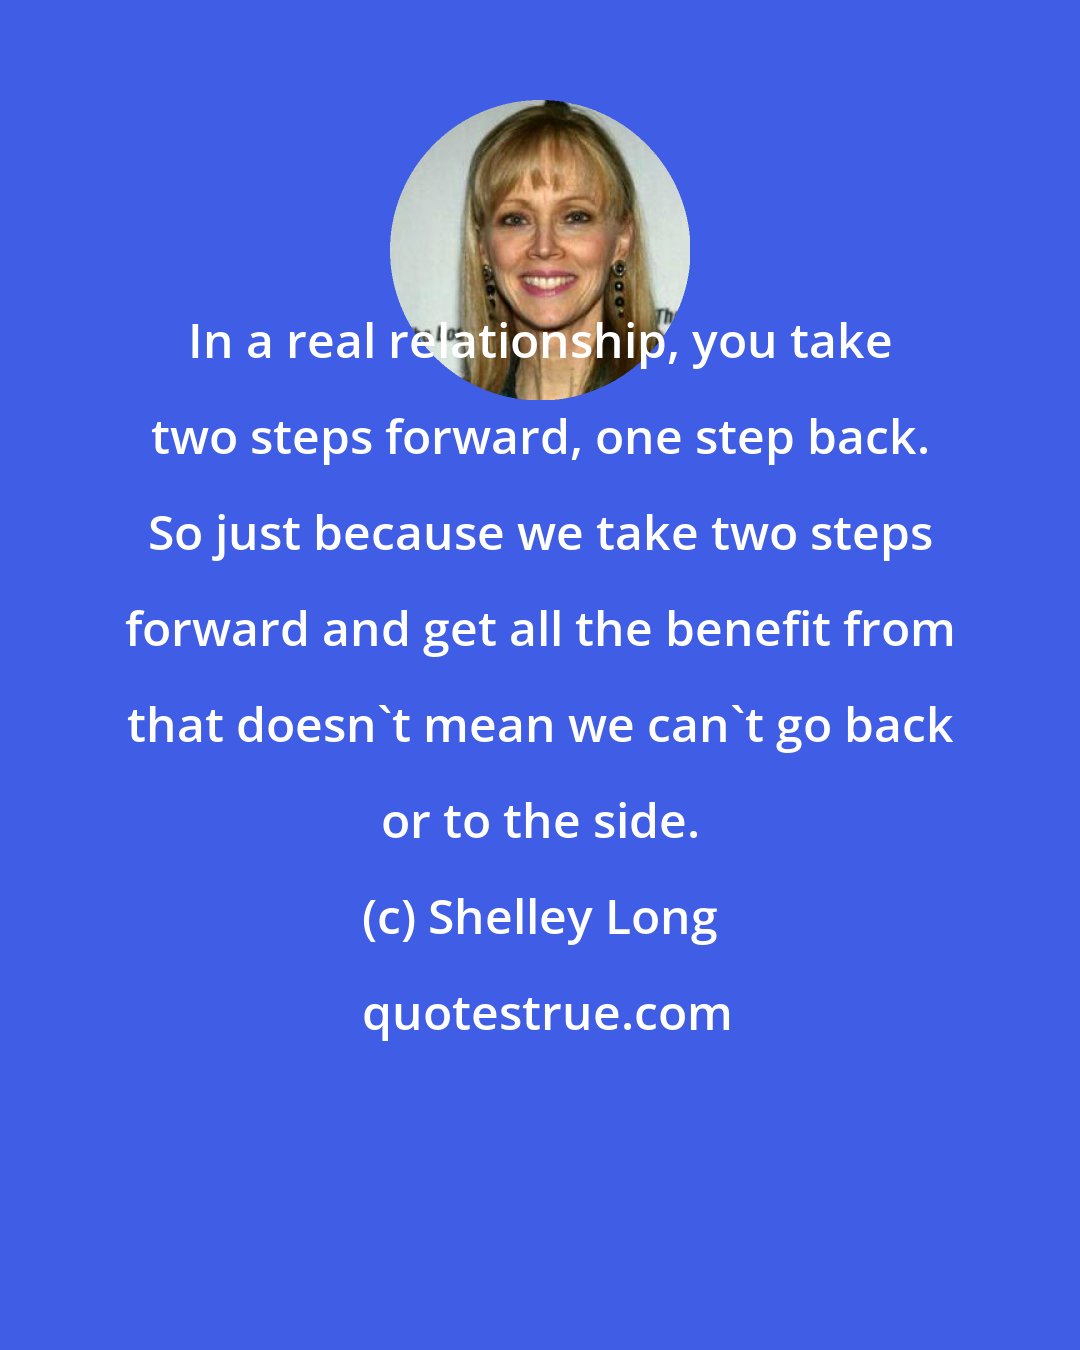 Shelley Long: In a real relationship, you take two steps forward, one step back. So just because we take two steps forward and get all the benefit from that doesn't mean we can't go back or to the side.